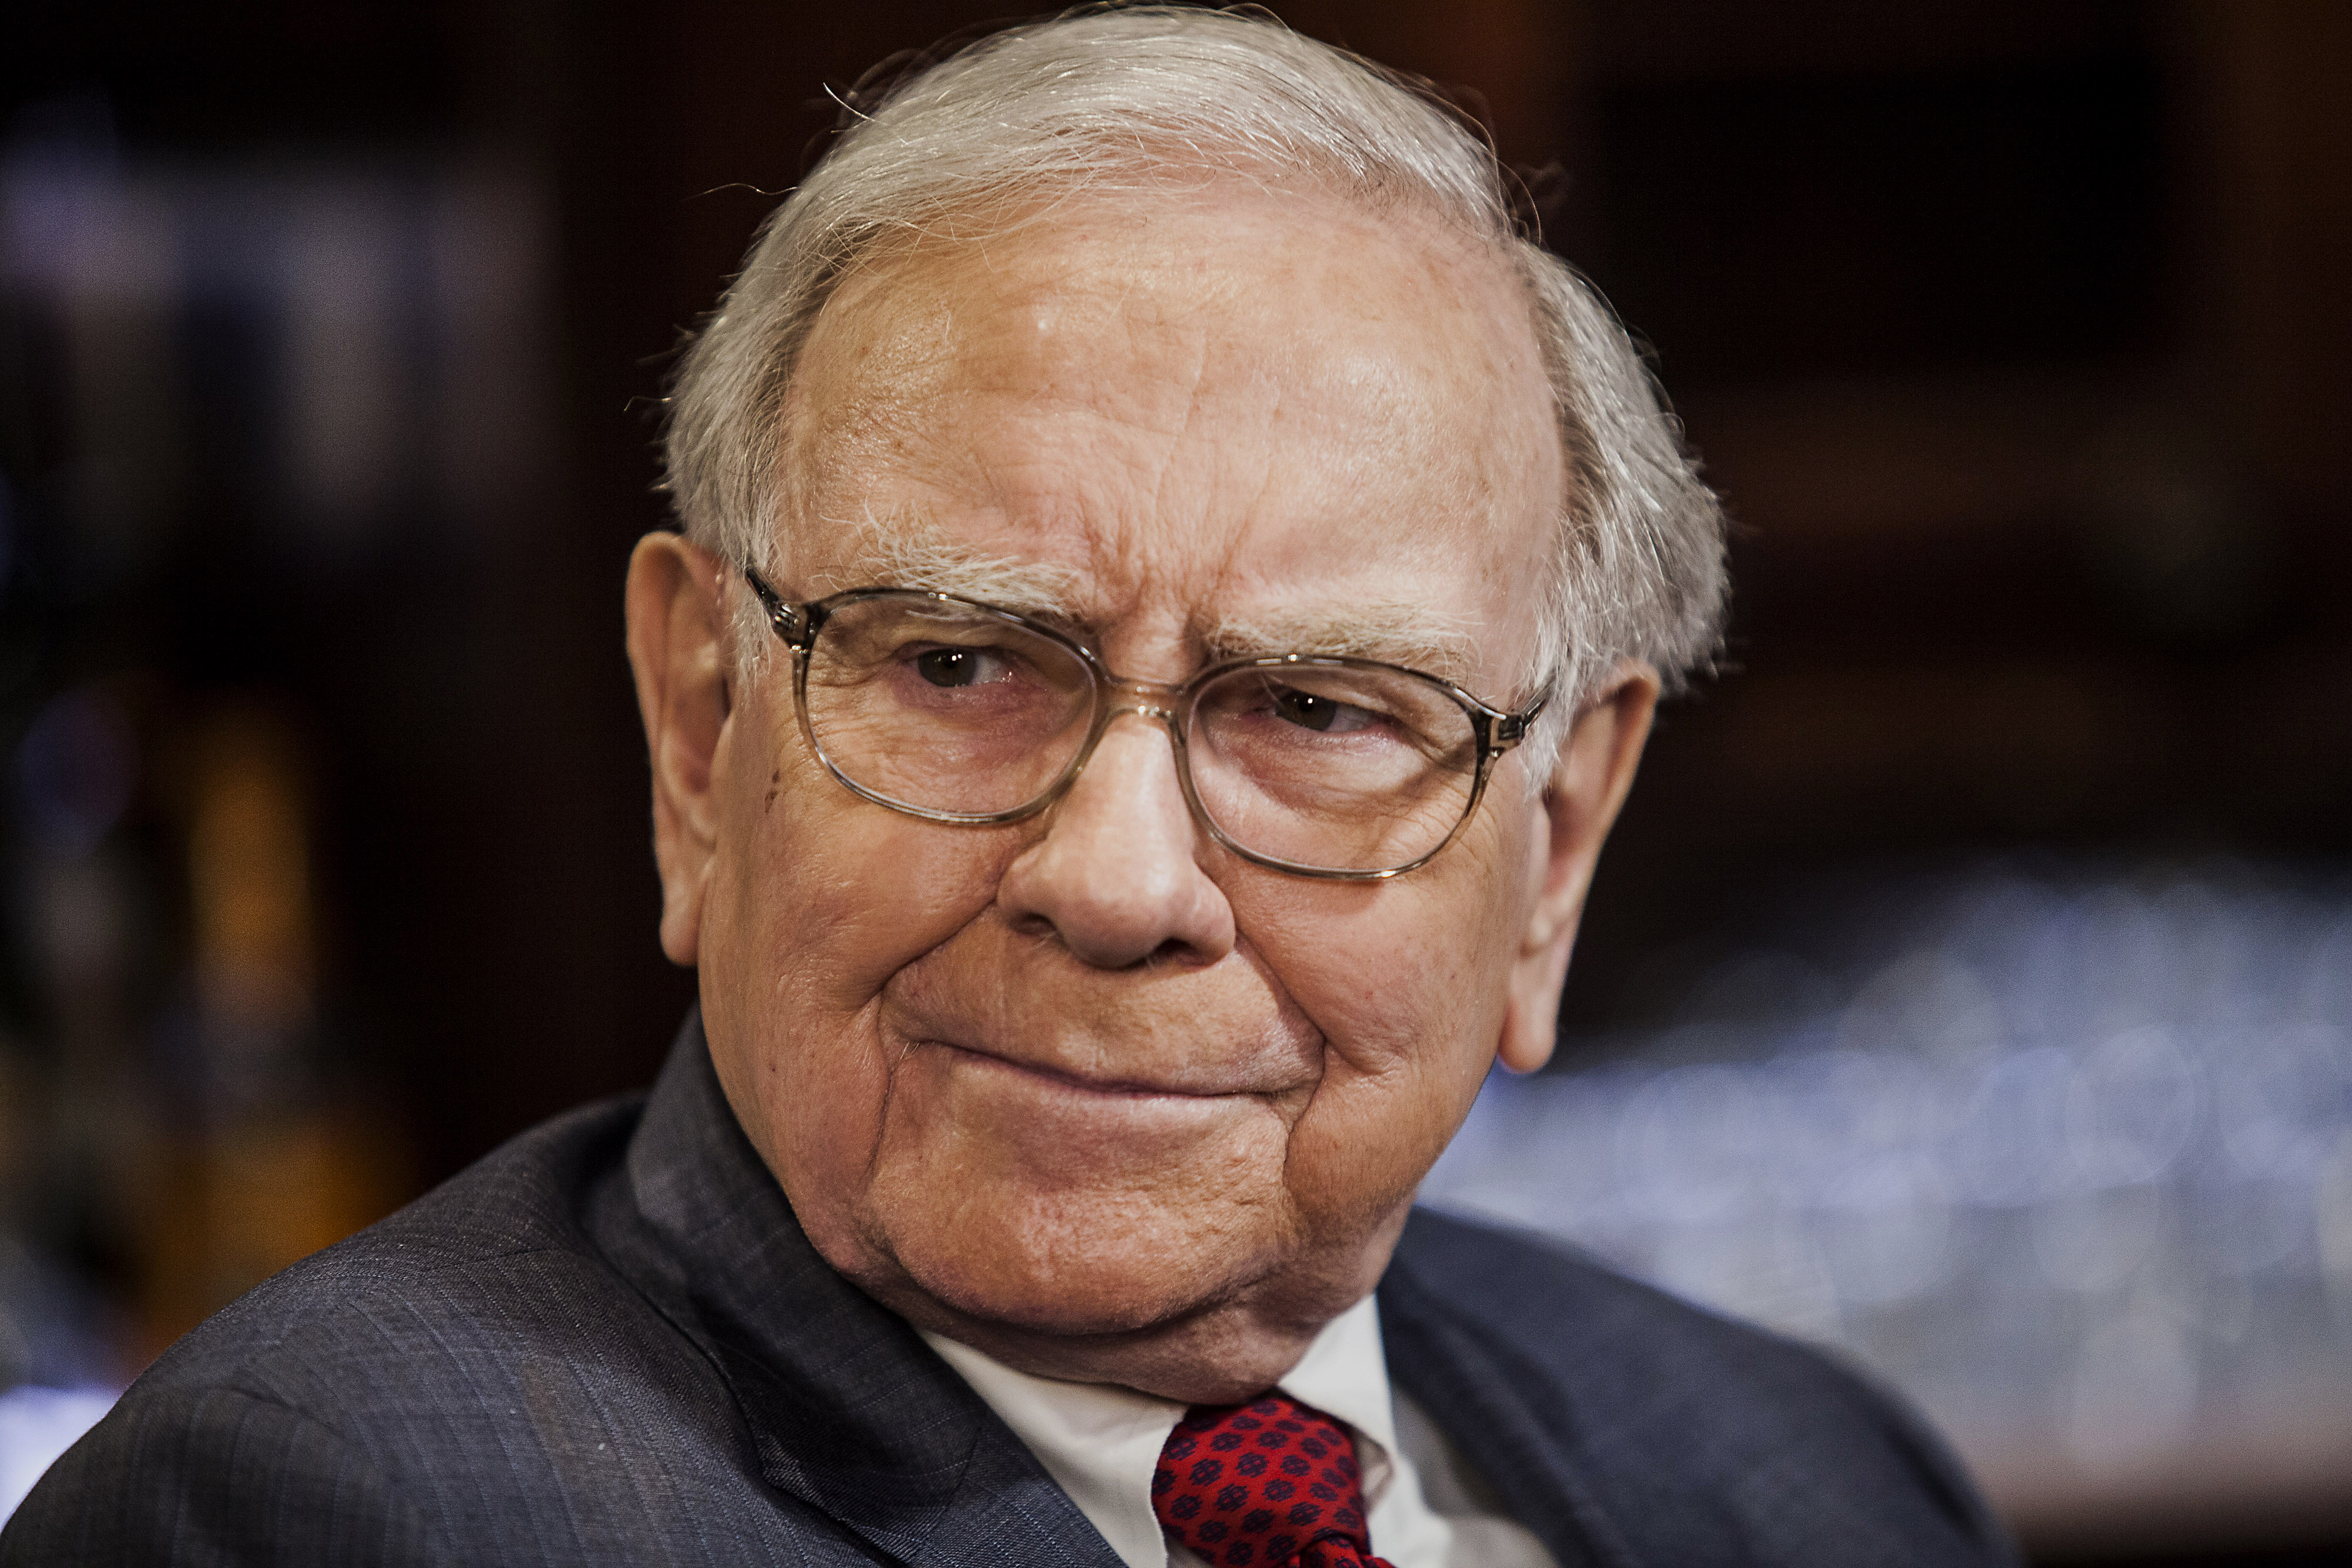 Warren Buffet during a Bloomberg Television Interview in New York City on April 23, 2014.